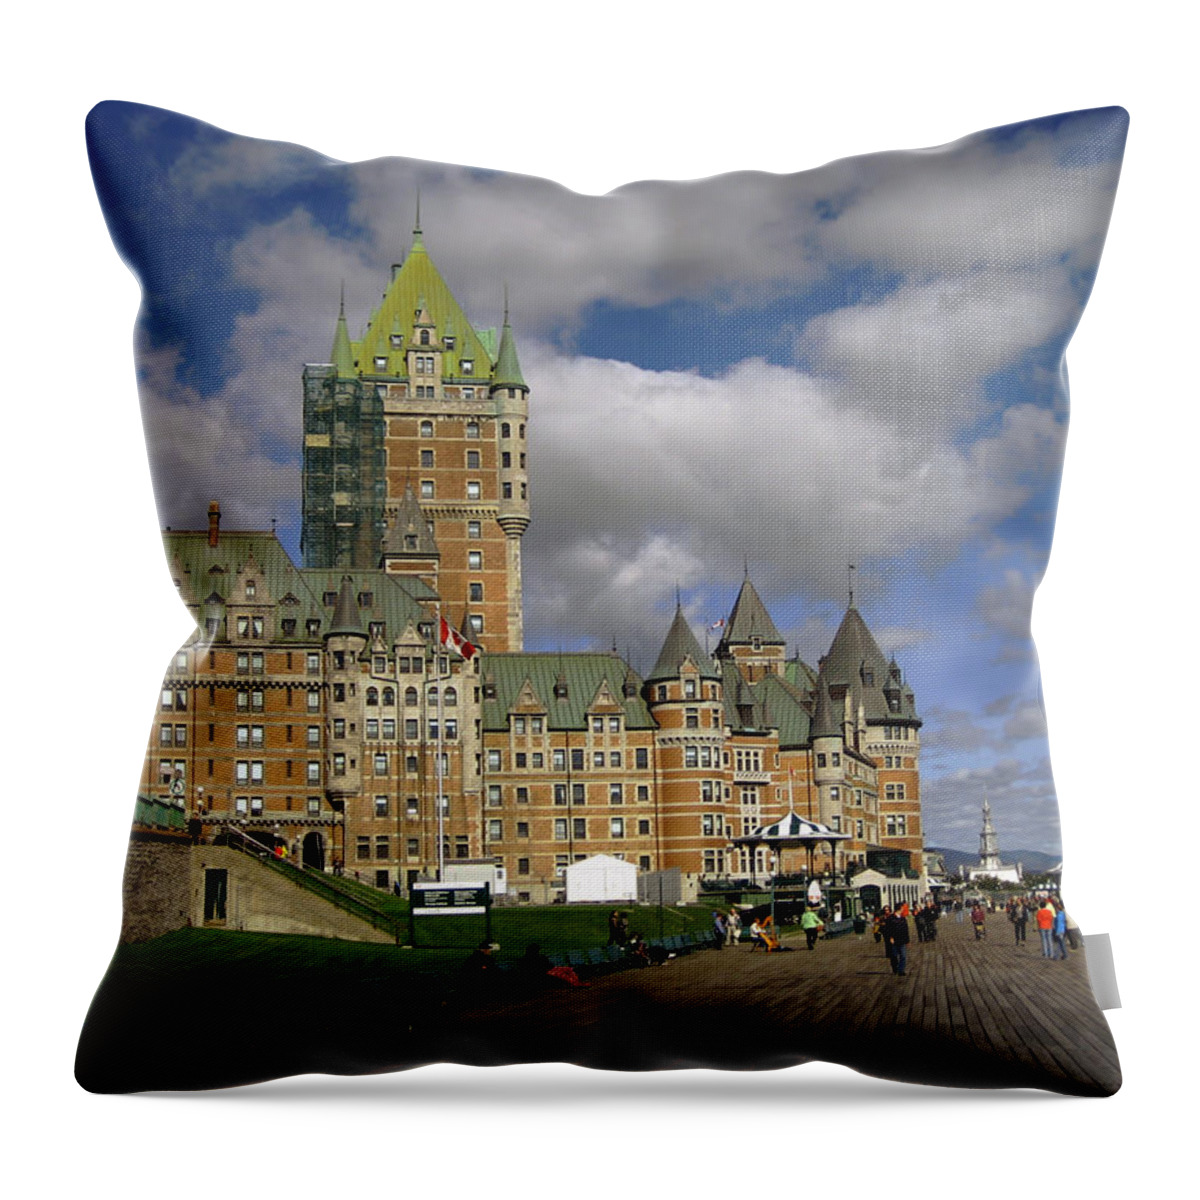 Chateau Frontenac Throw Pillow featuring the photograph Chateau Frontenac Quebec City by Nicky Jameson